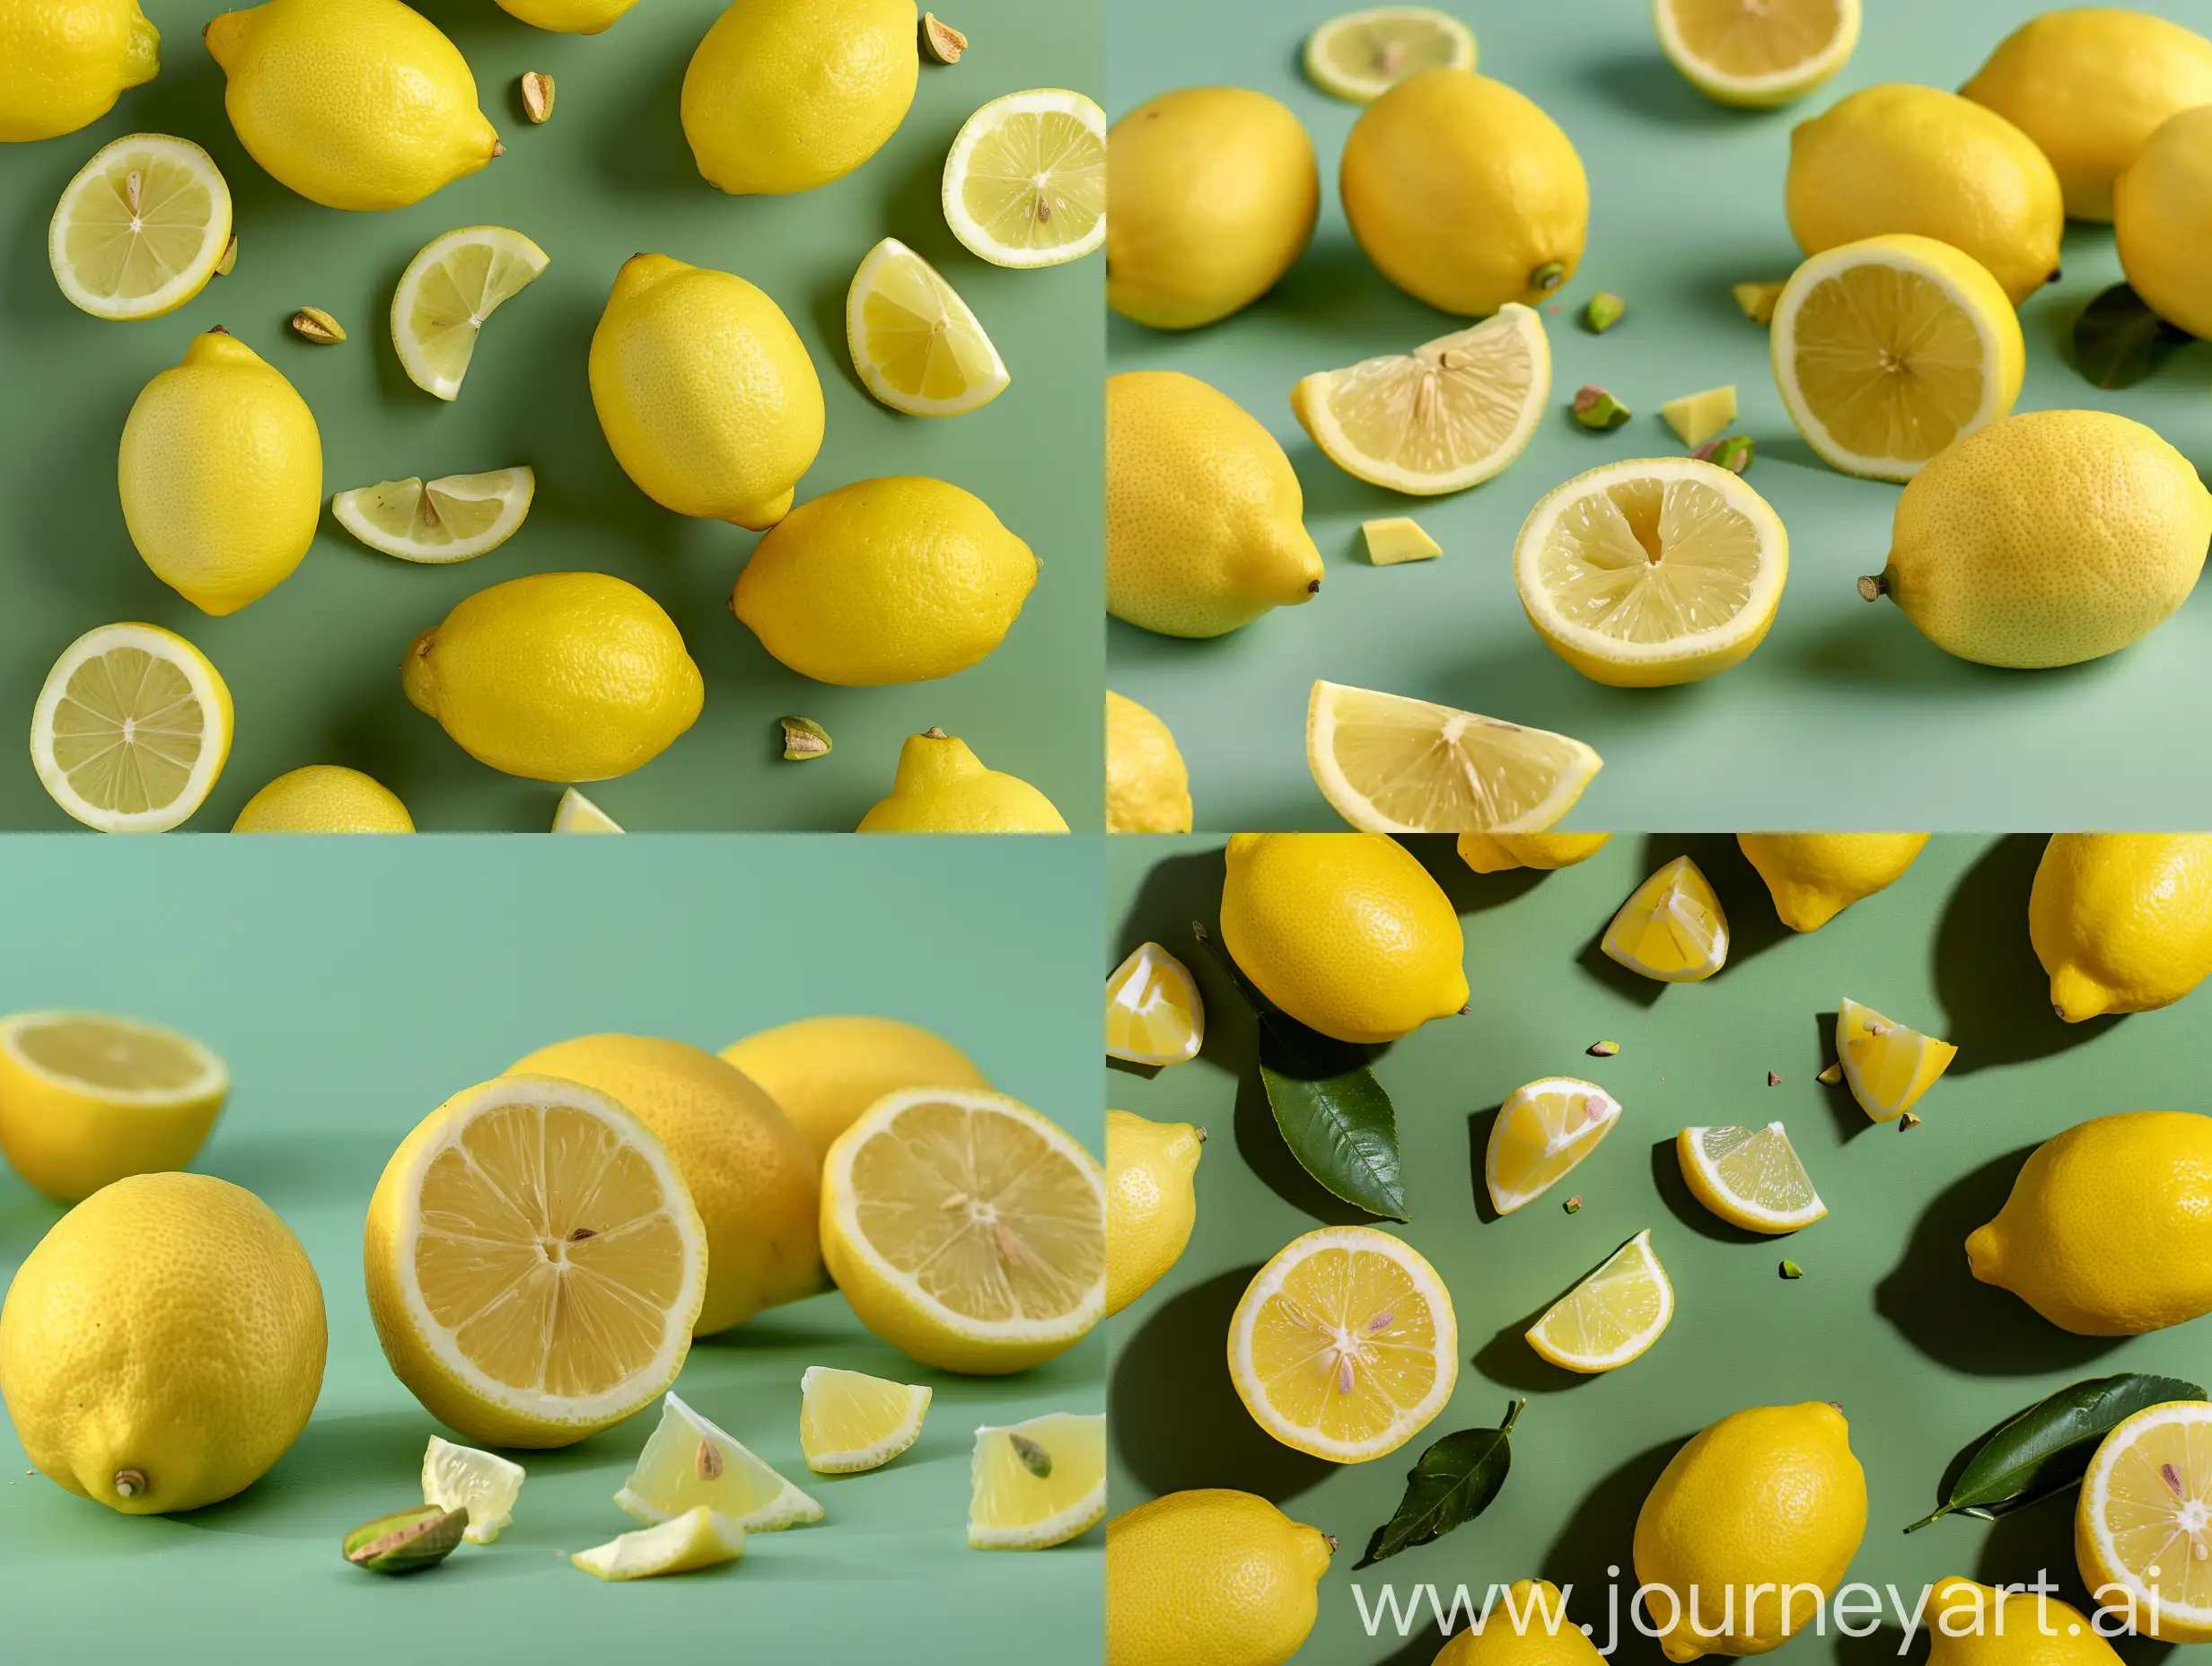 Real photo of some yellow lemons with cut pieces on pistachio green background